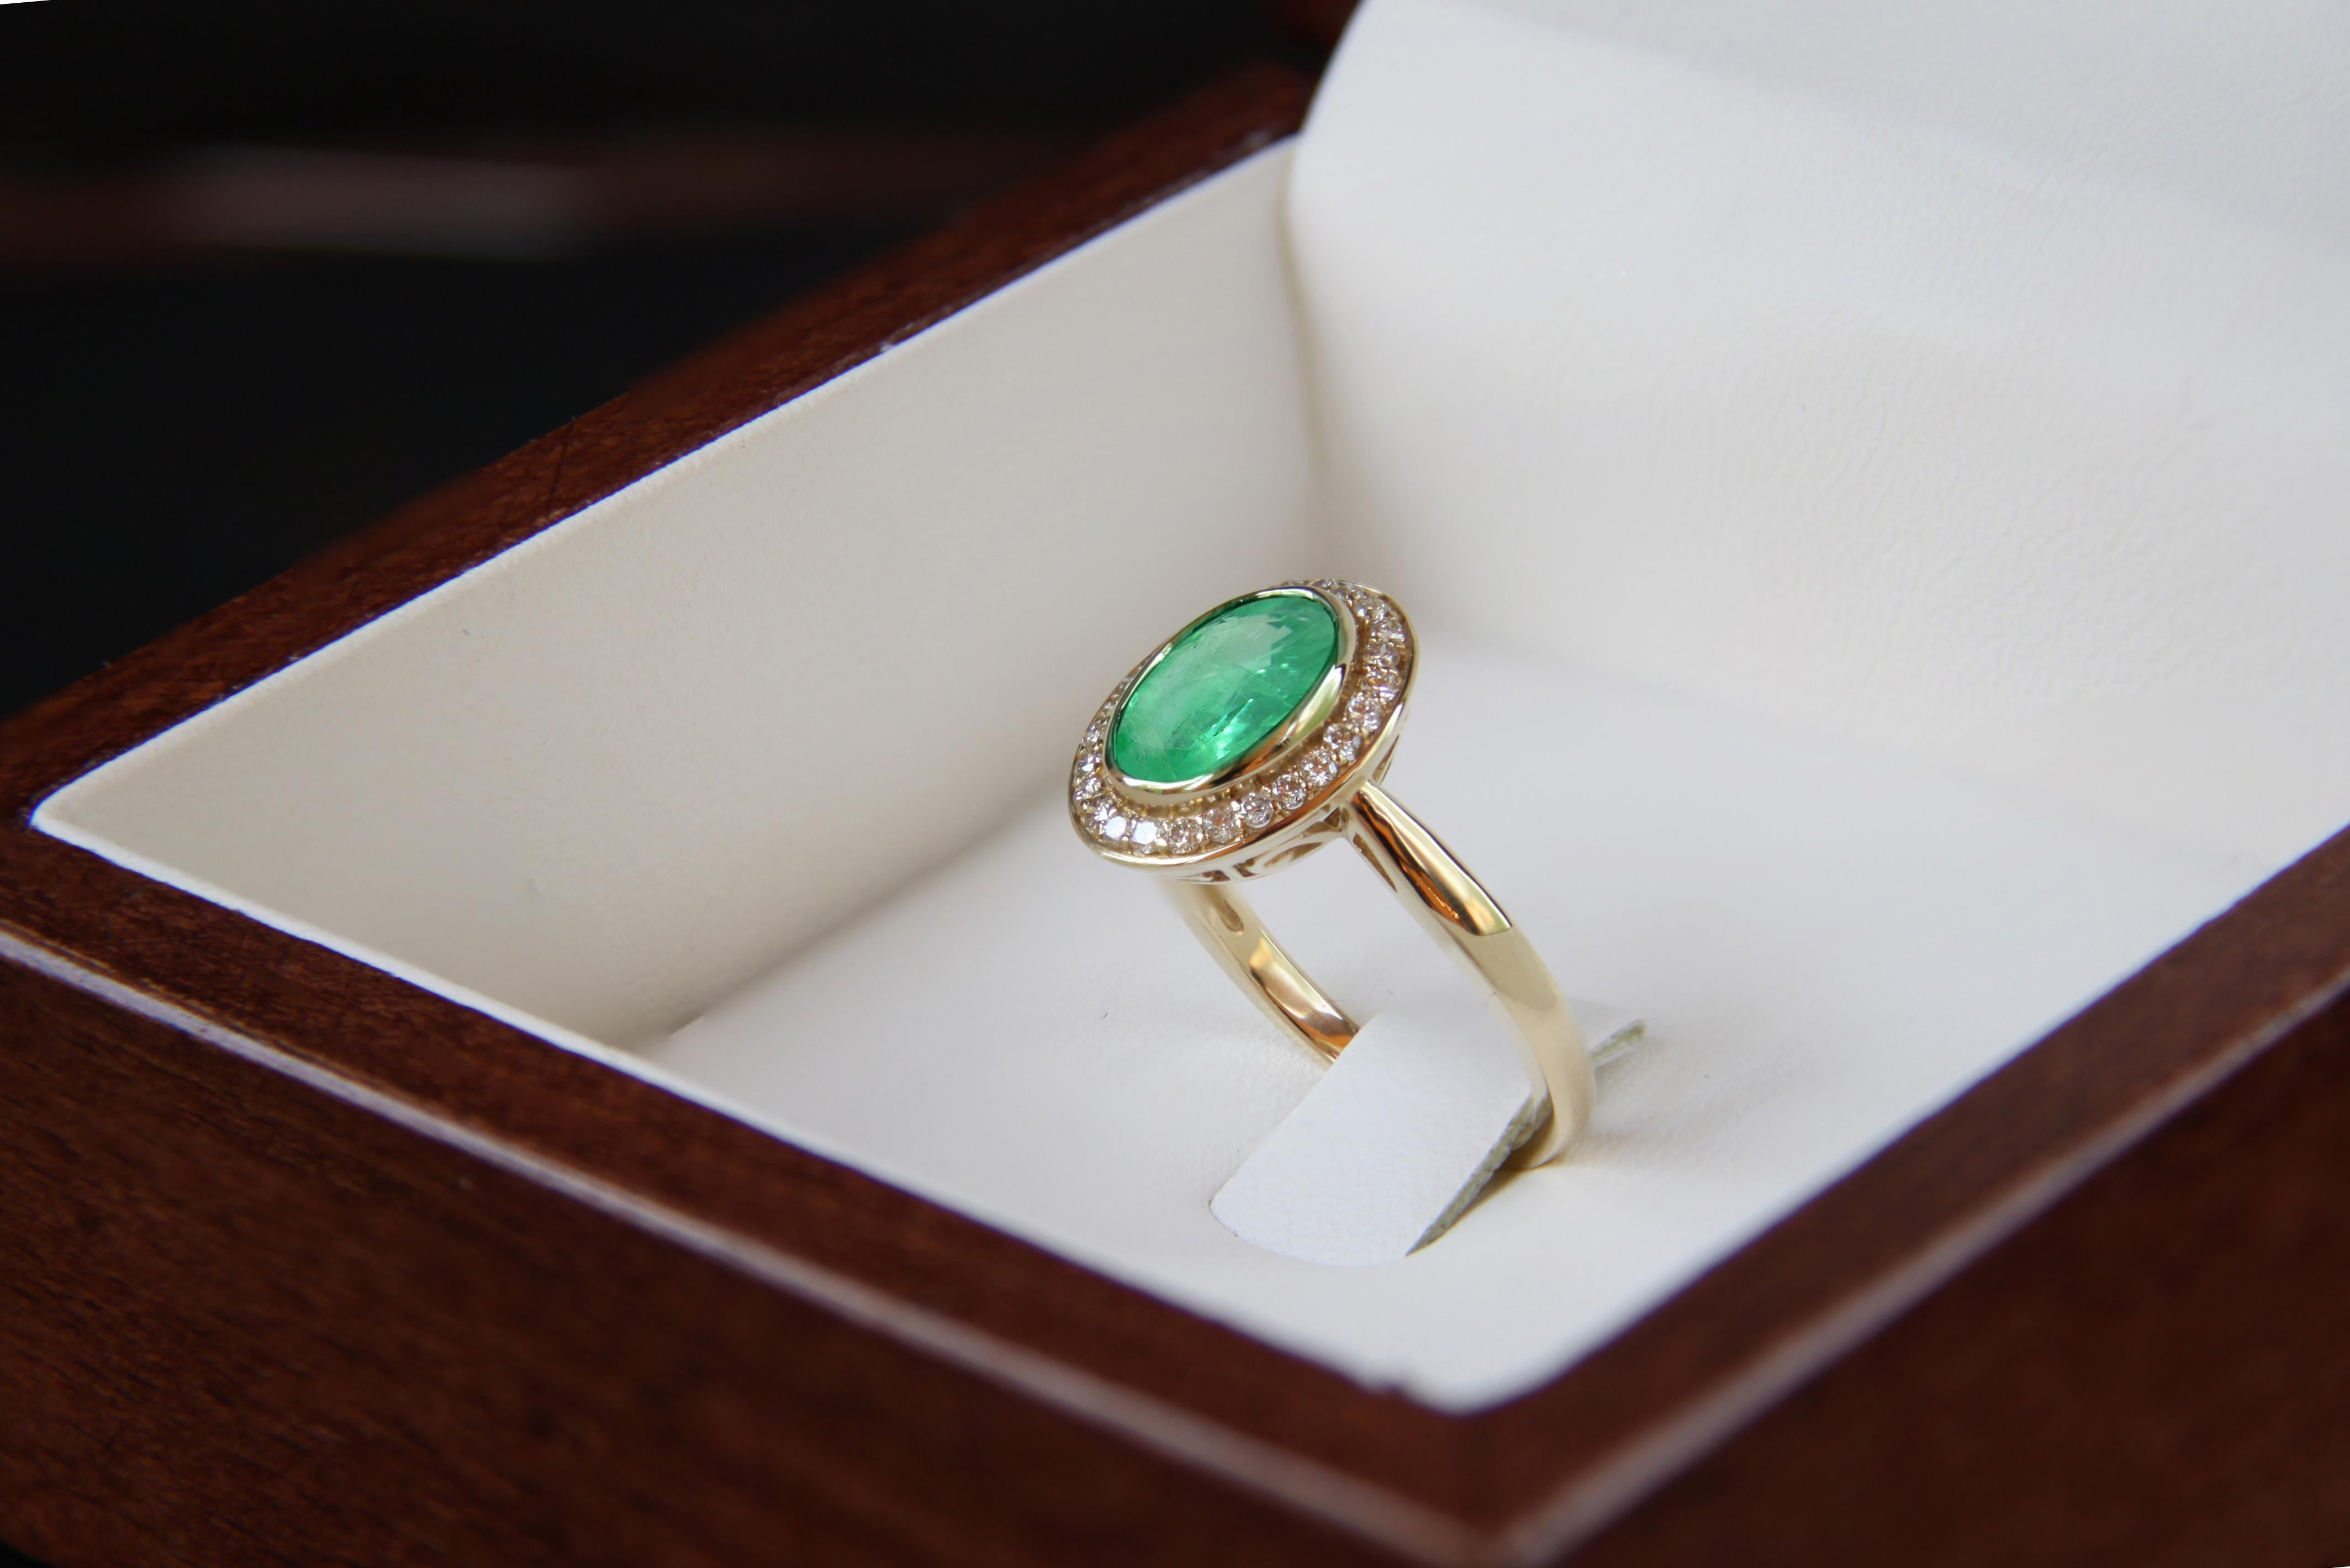 For Sale:  Emerald and diamonds 14k gold ring. 3